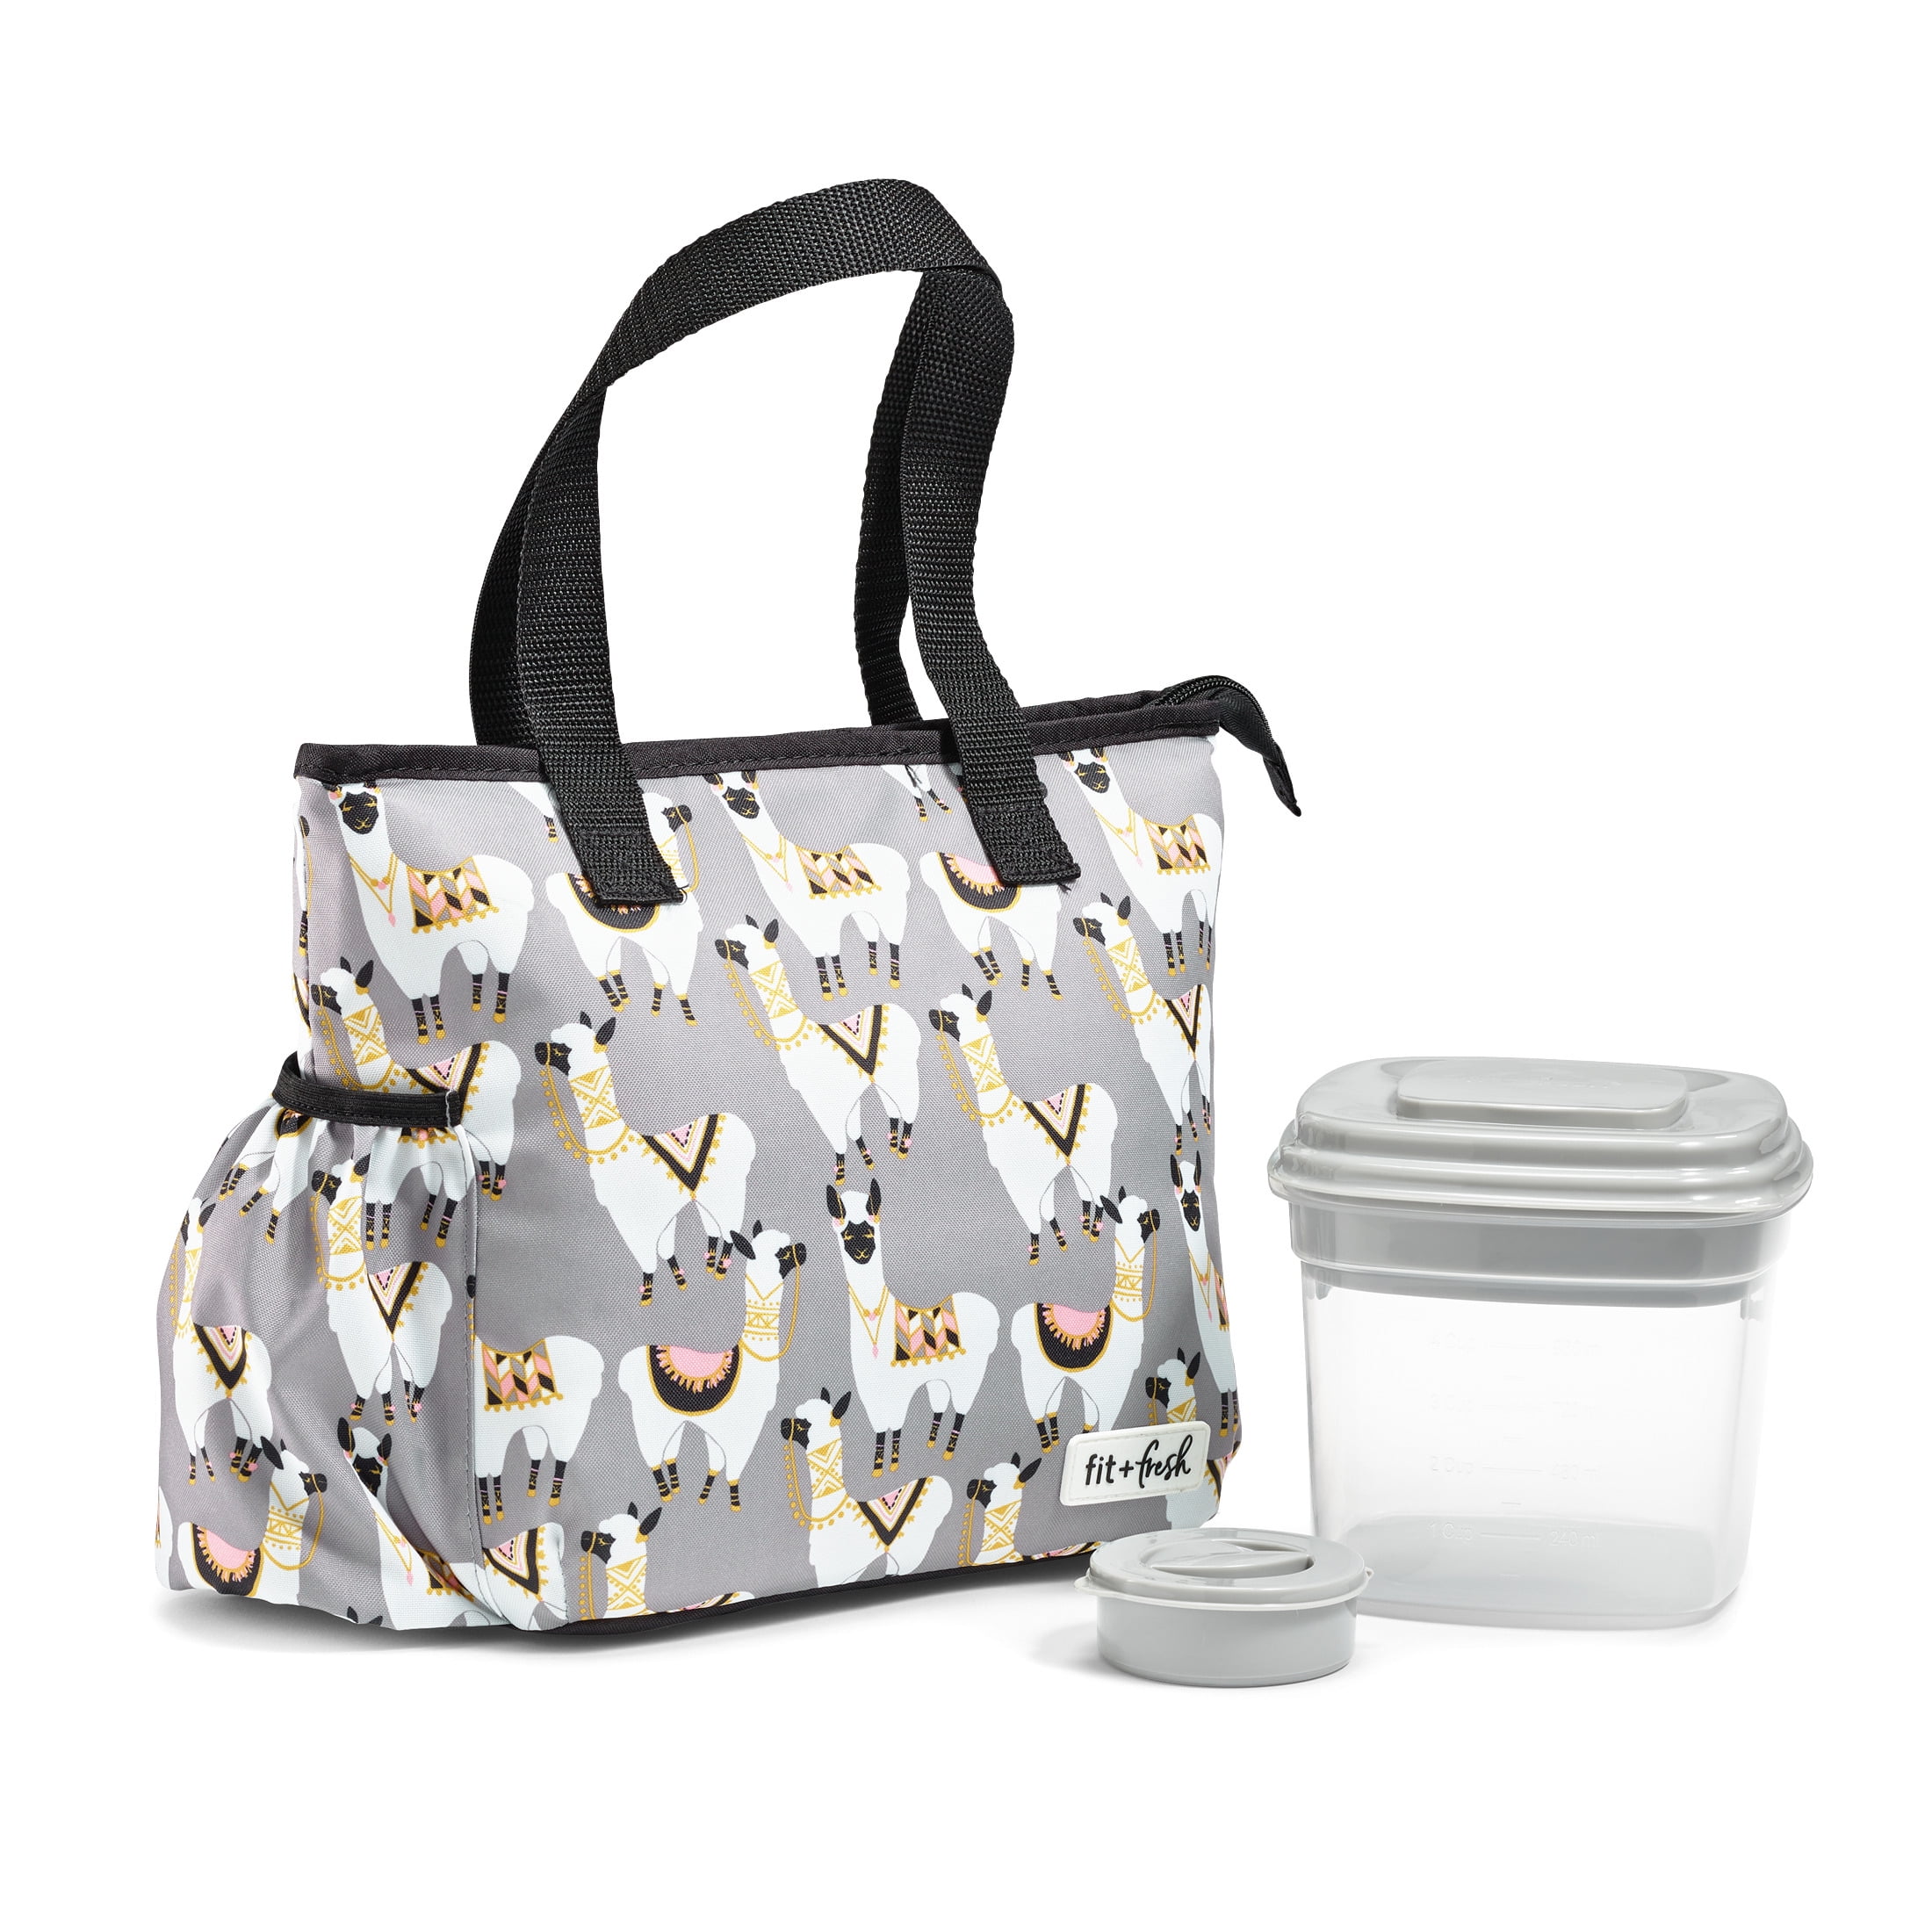 Fit + Fresh Insulated Lunch Bag w/ Salad Container (Gray Llamas) $7.49 + Free S&H w/ Walmart+ or $35+